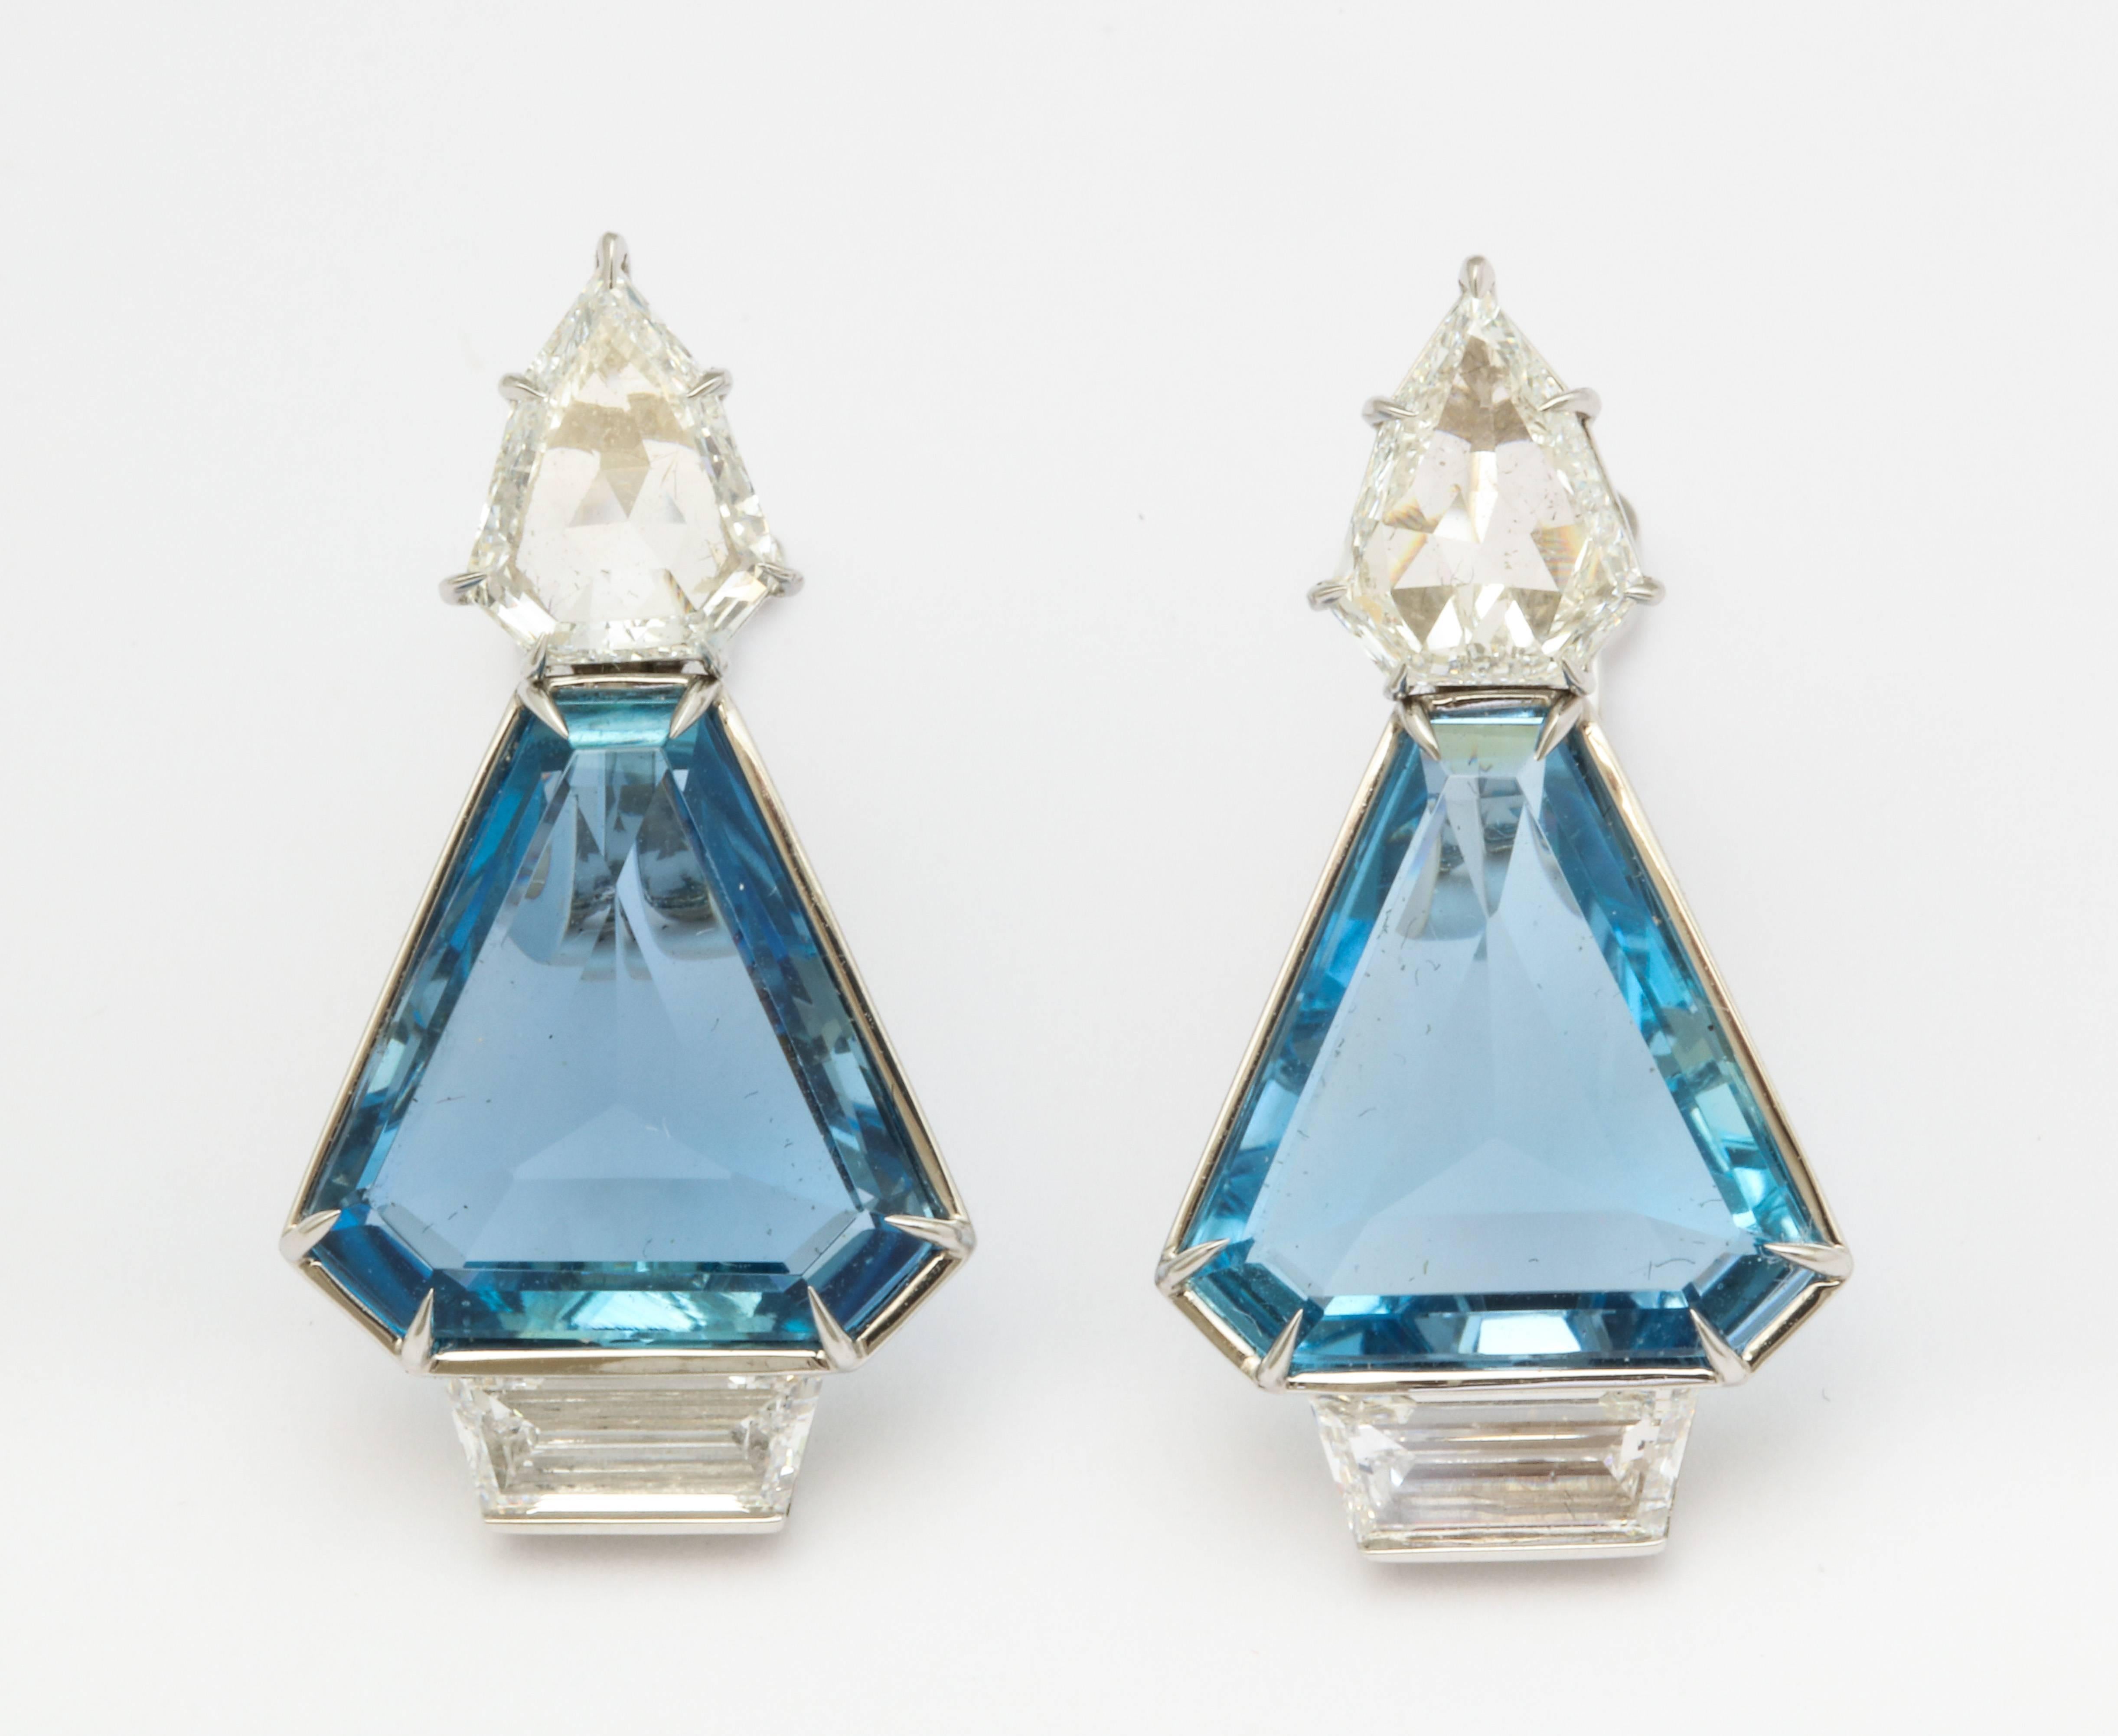 These one of a kind earclips feature a perfectly matched pair of aquamarines, weighing a total of 7.37cts.  They are cut as shield shapes, which are rarely seen and emphasize the truly beautiful color of the stones.  Completing the design are two